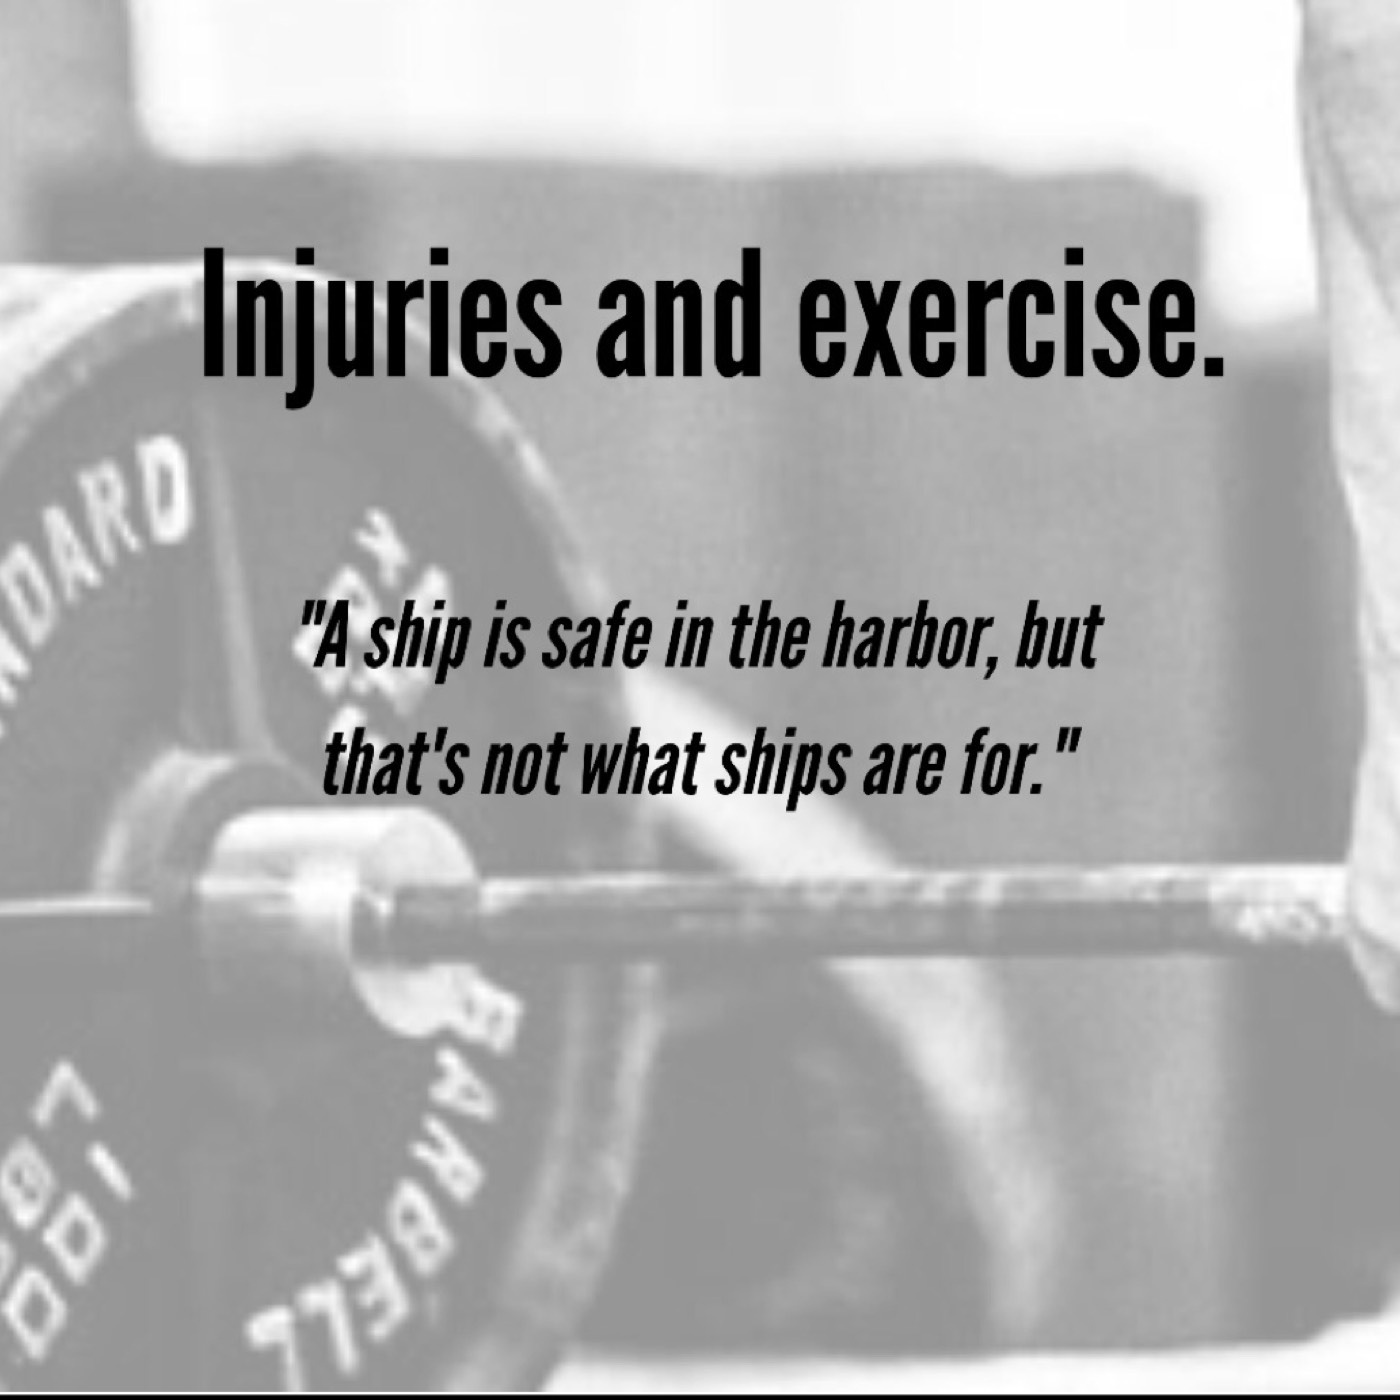 Episode 123- Injuries and exercise.